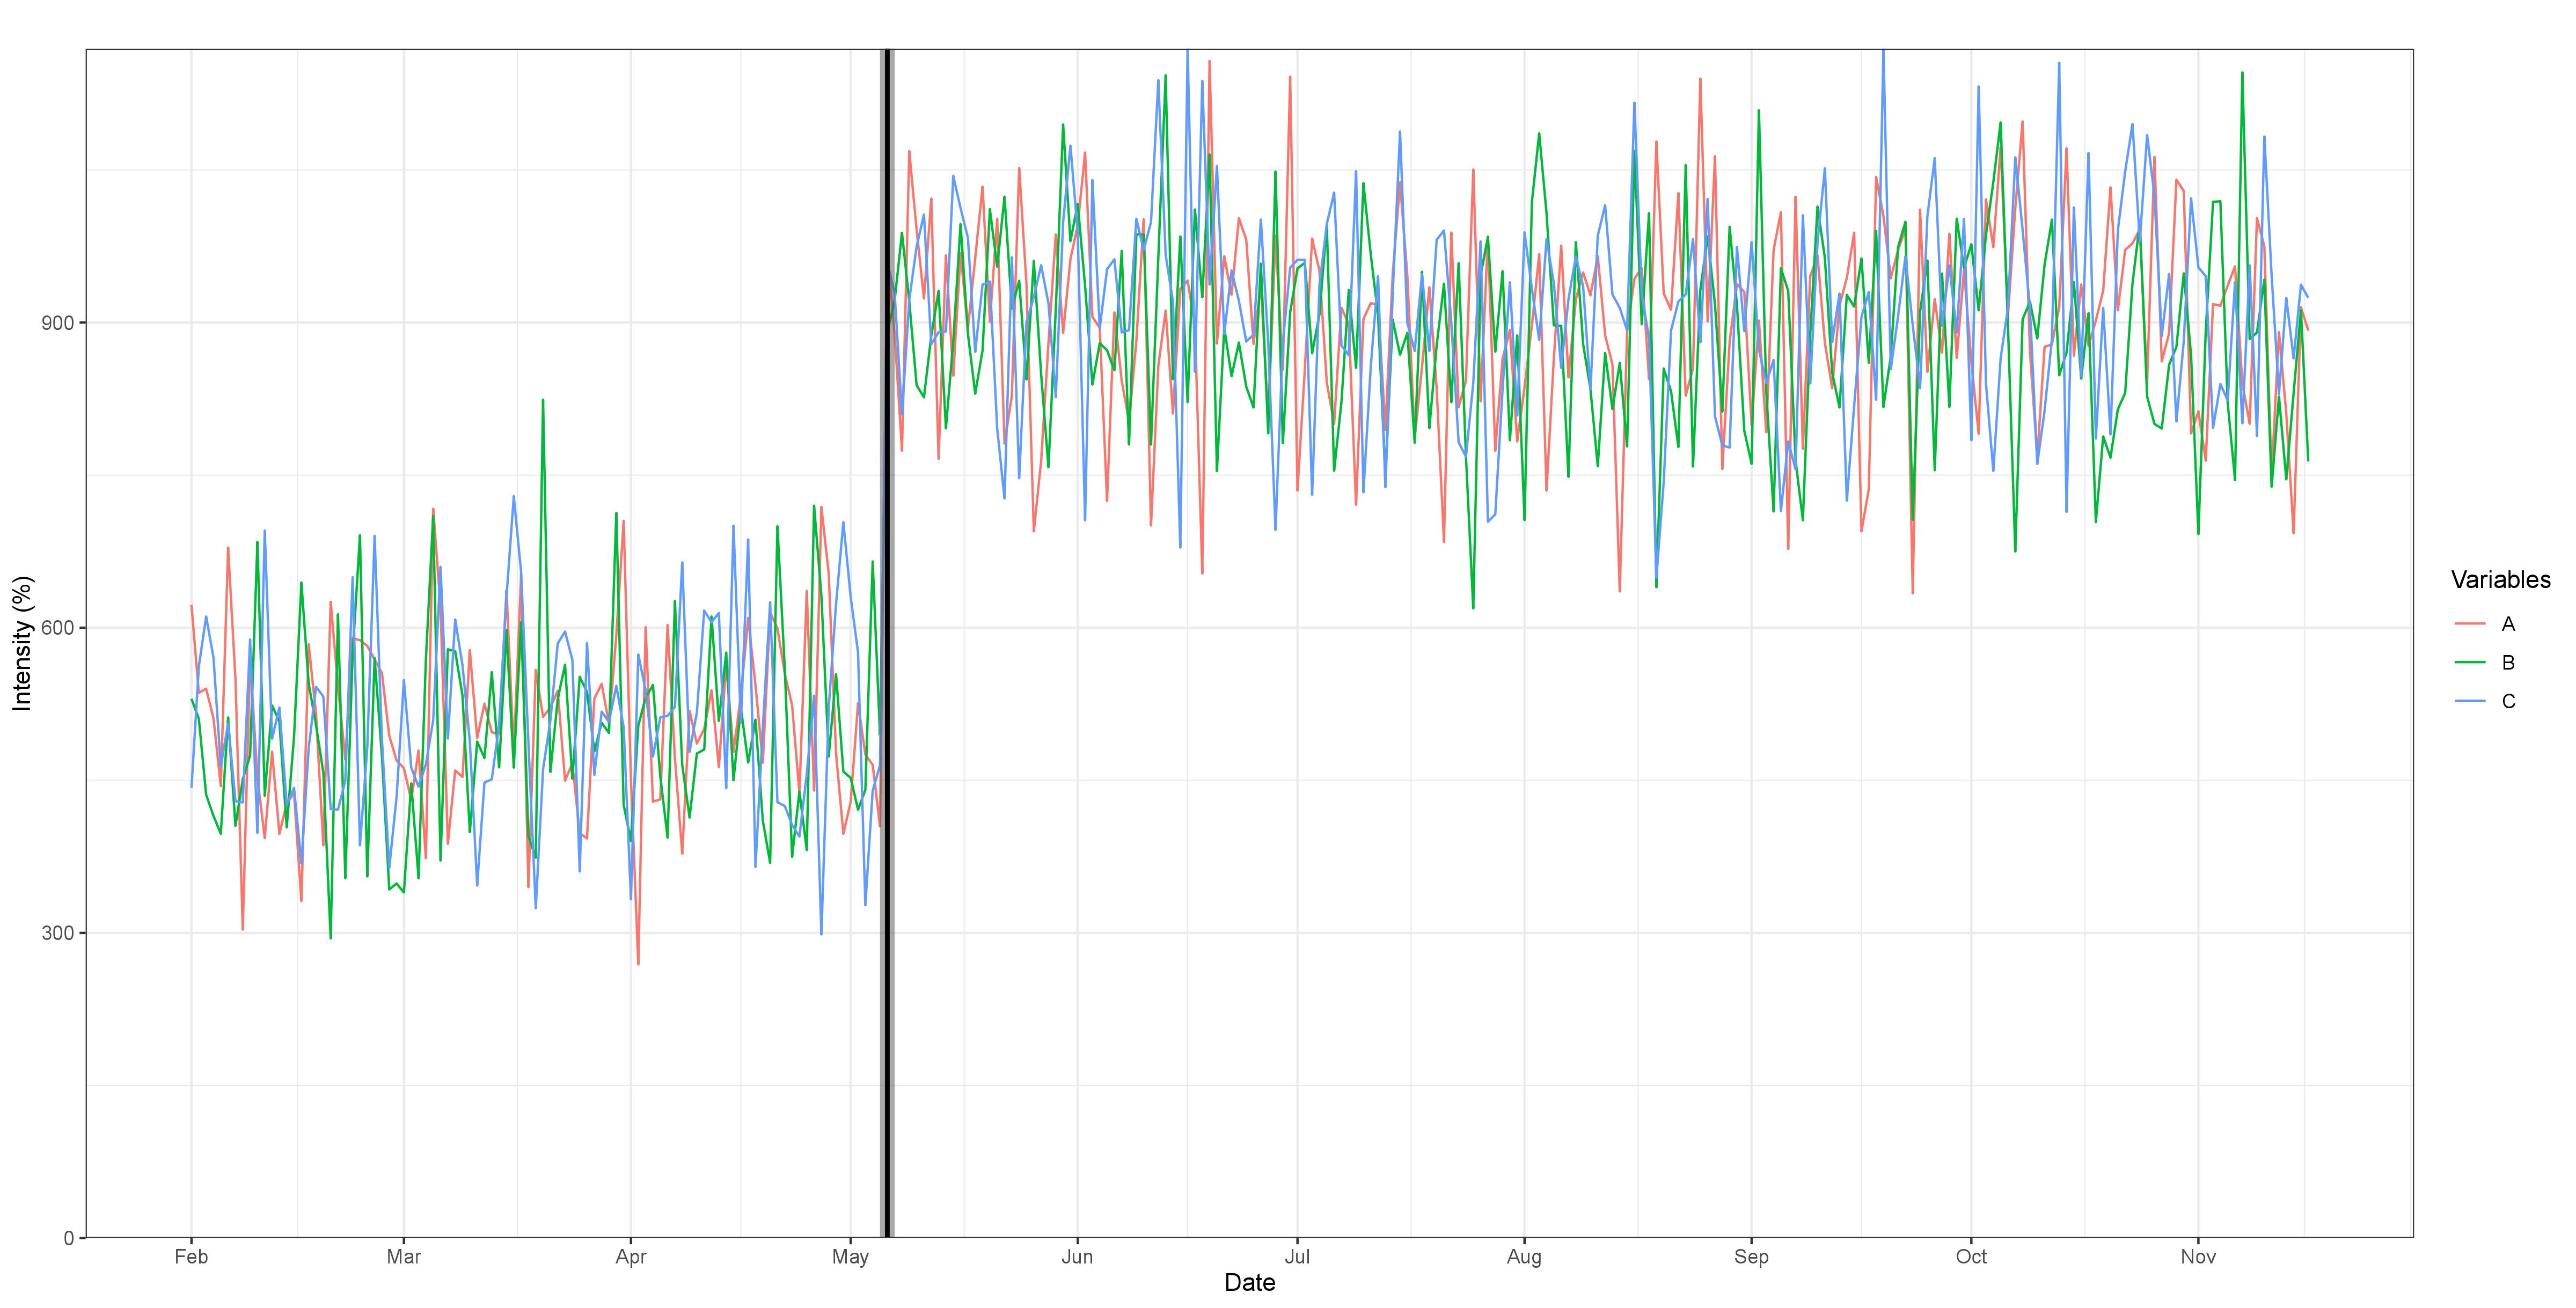 Fig 1. Break detection for three simulated variables experiencing a common break at 35% of the sample, with an intensity parameter of four. The order of the VAR(q) is 1, after selection by the BIC, with no trend or additional covariates added. The break is easy to identify visually and is well captured by the algorithm. Max F-statistic: 159.34, and the confidence intervals for 90%, 95% and 99%, represented by the shaded areas are very concentrated around the break.